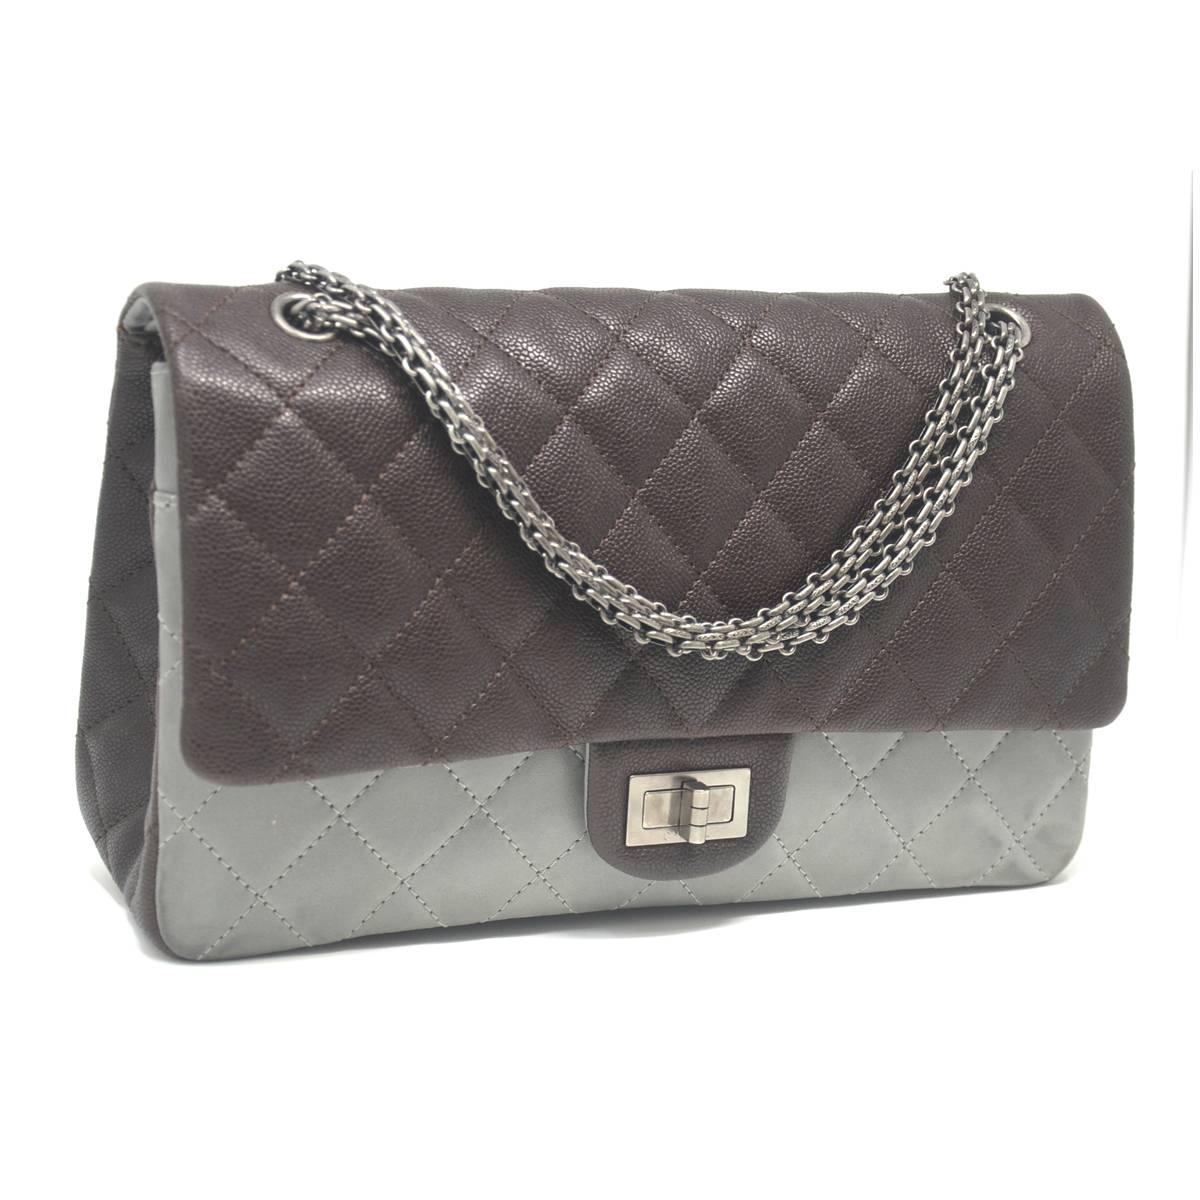 Company - Chanel
Model - Reissue 2.55 Classic
Color - Brown/Grey
Date Code - 14029440
Material - Caviar Leather / Washed Lambskin
Measurements - 12